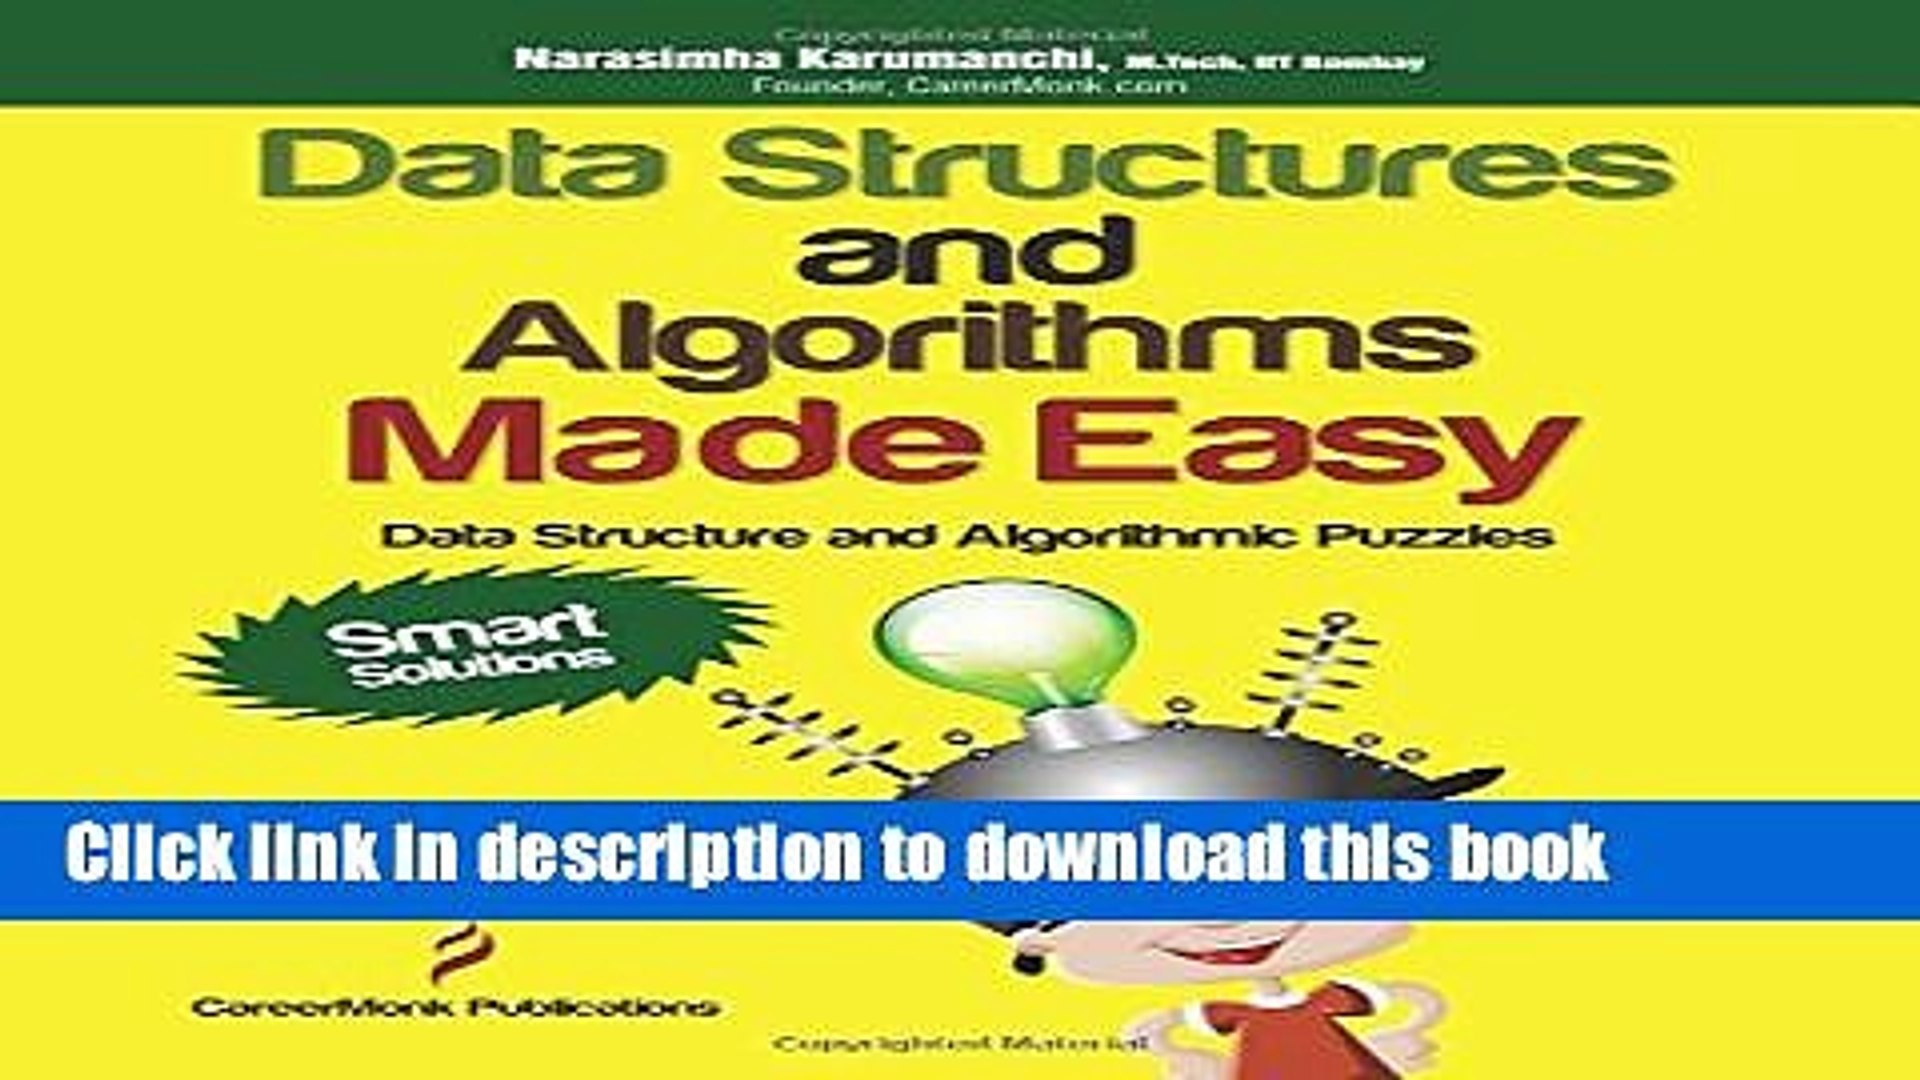 Ebook Data Structures and Algorithms Made Easy: Data Structure and Algorithmic Puzzles Full Download